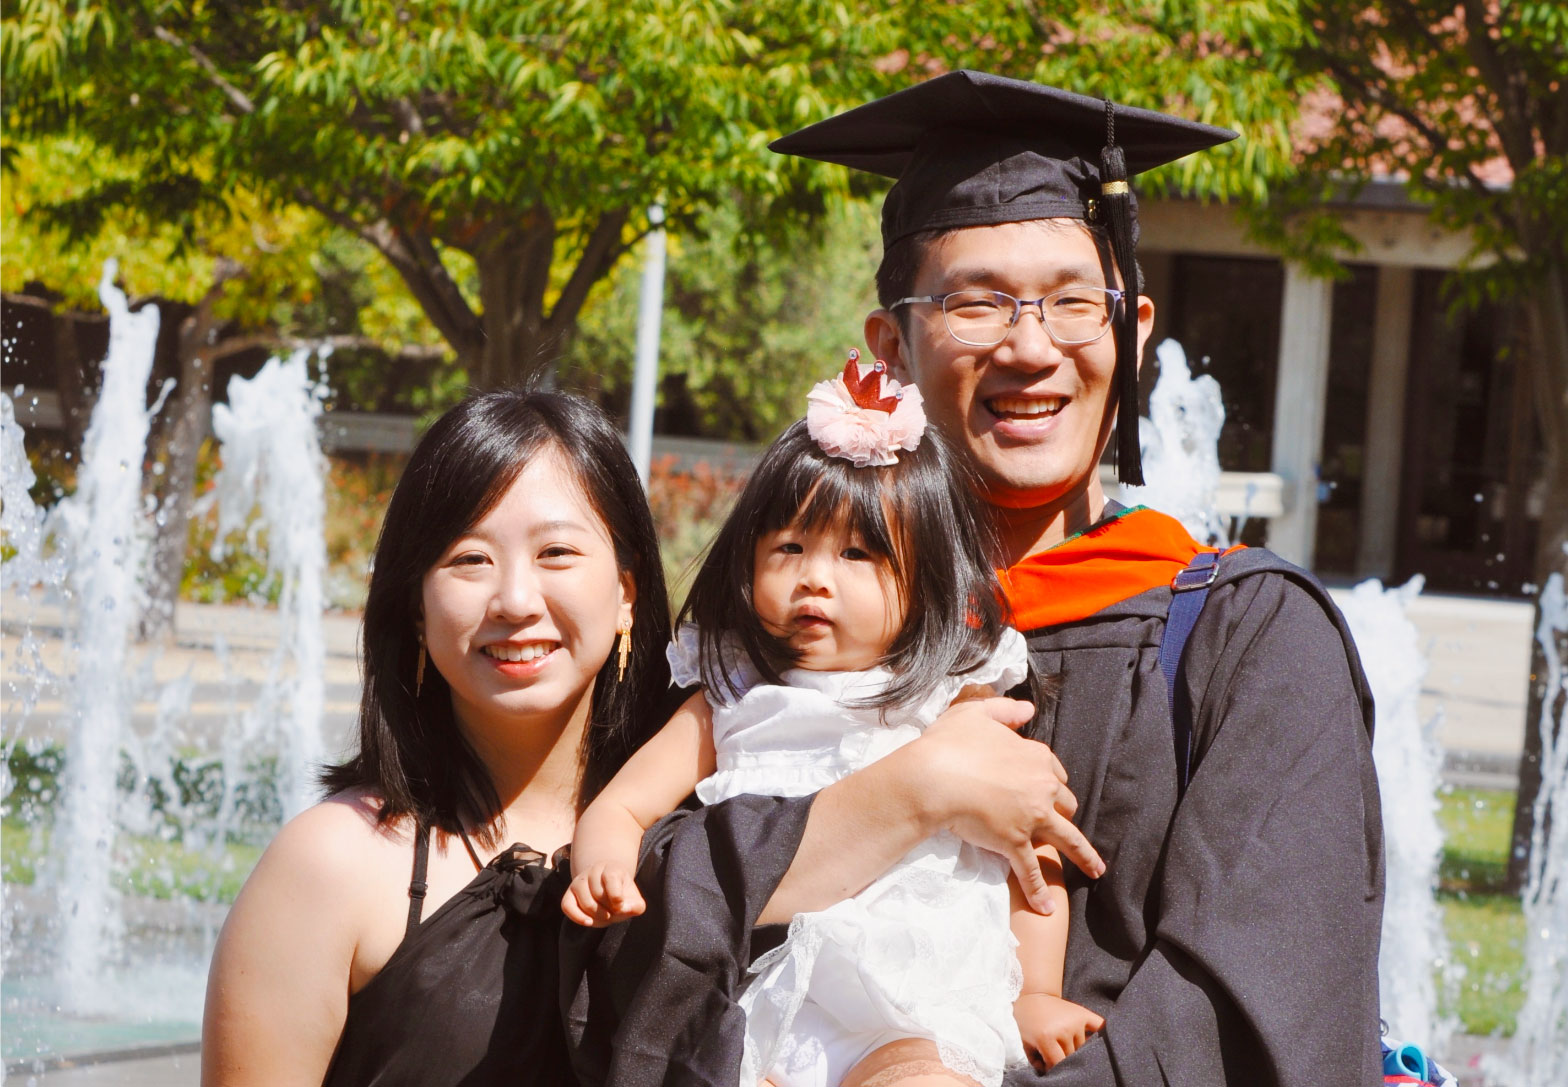 couple holding a child. the man is wearing a graduation gown